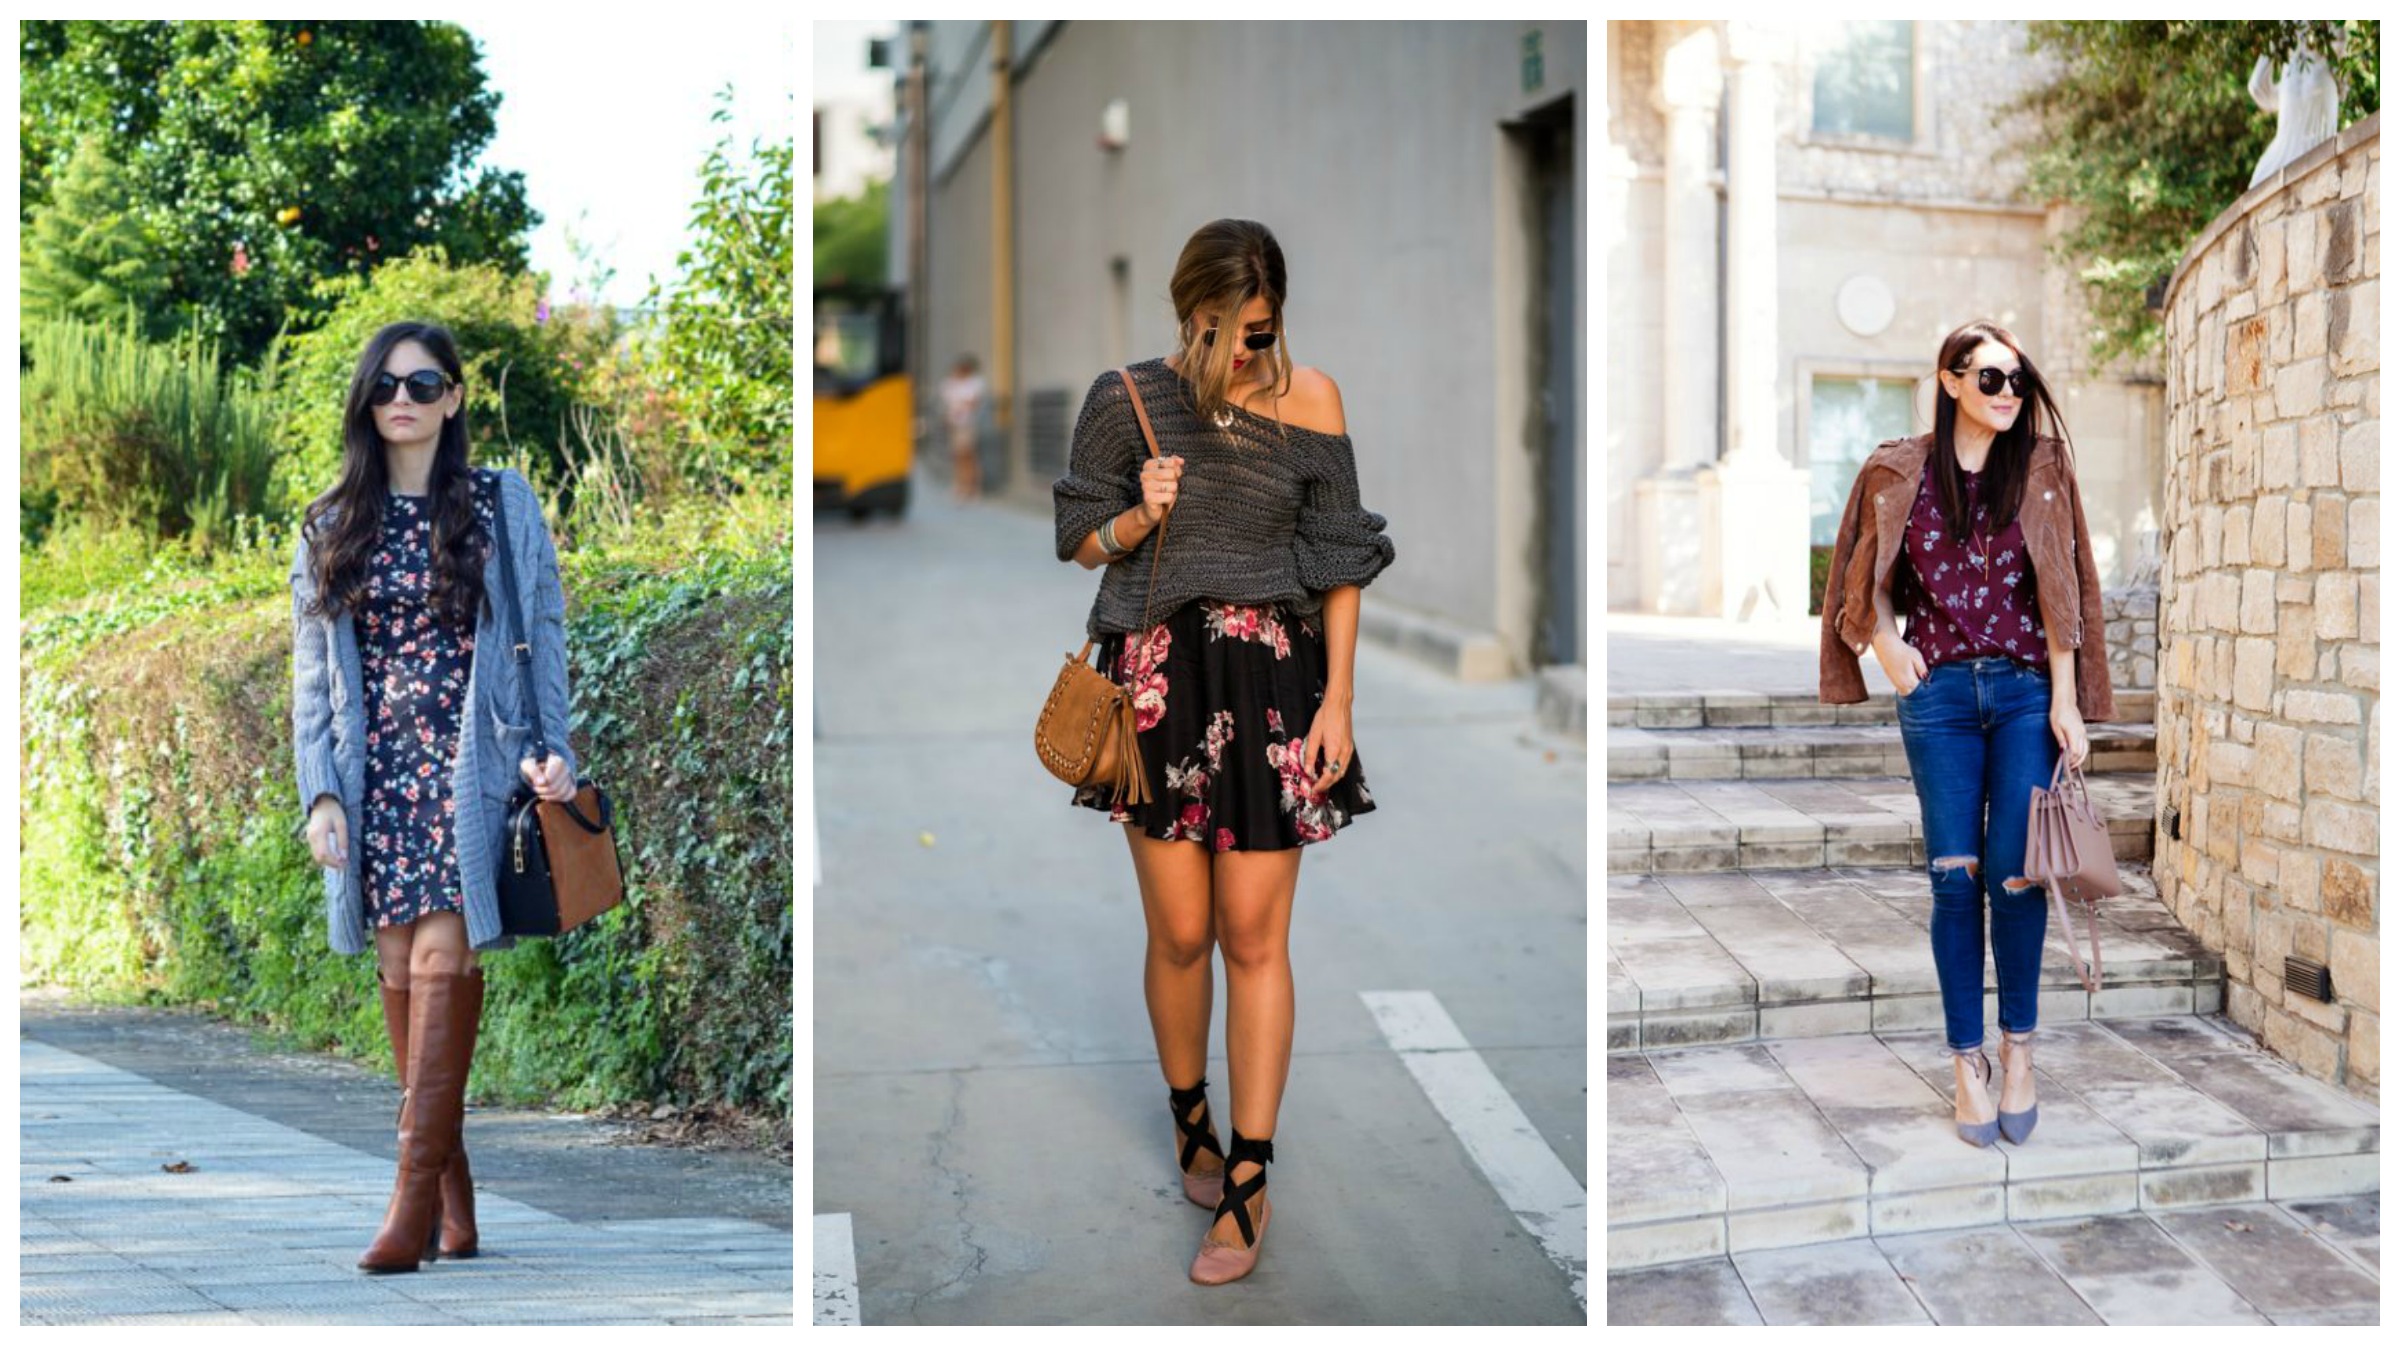 Floral Isn't Just for Summer! 15 Ways to Rock It This Fall - fashionsy.com